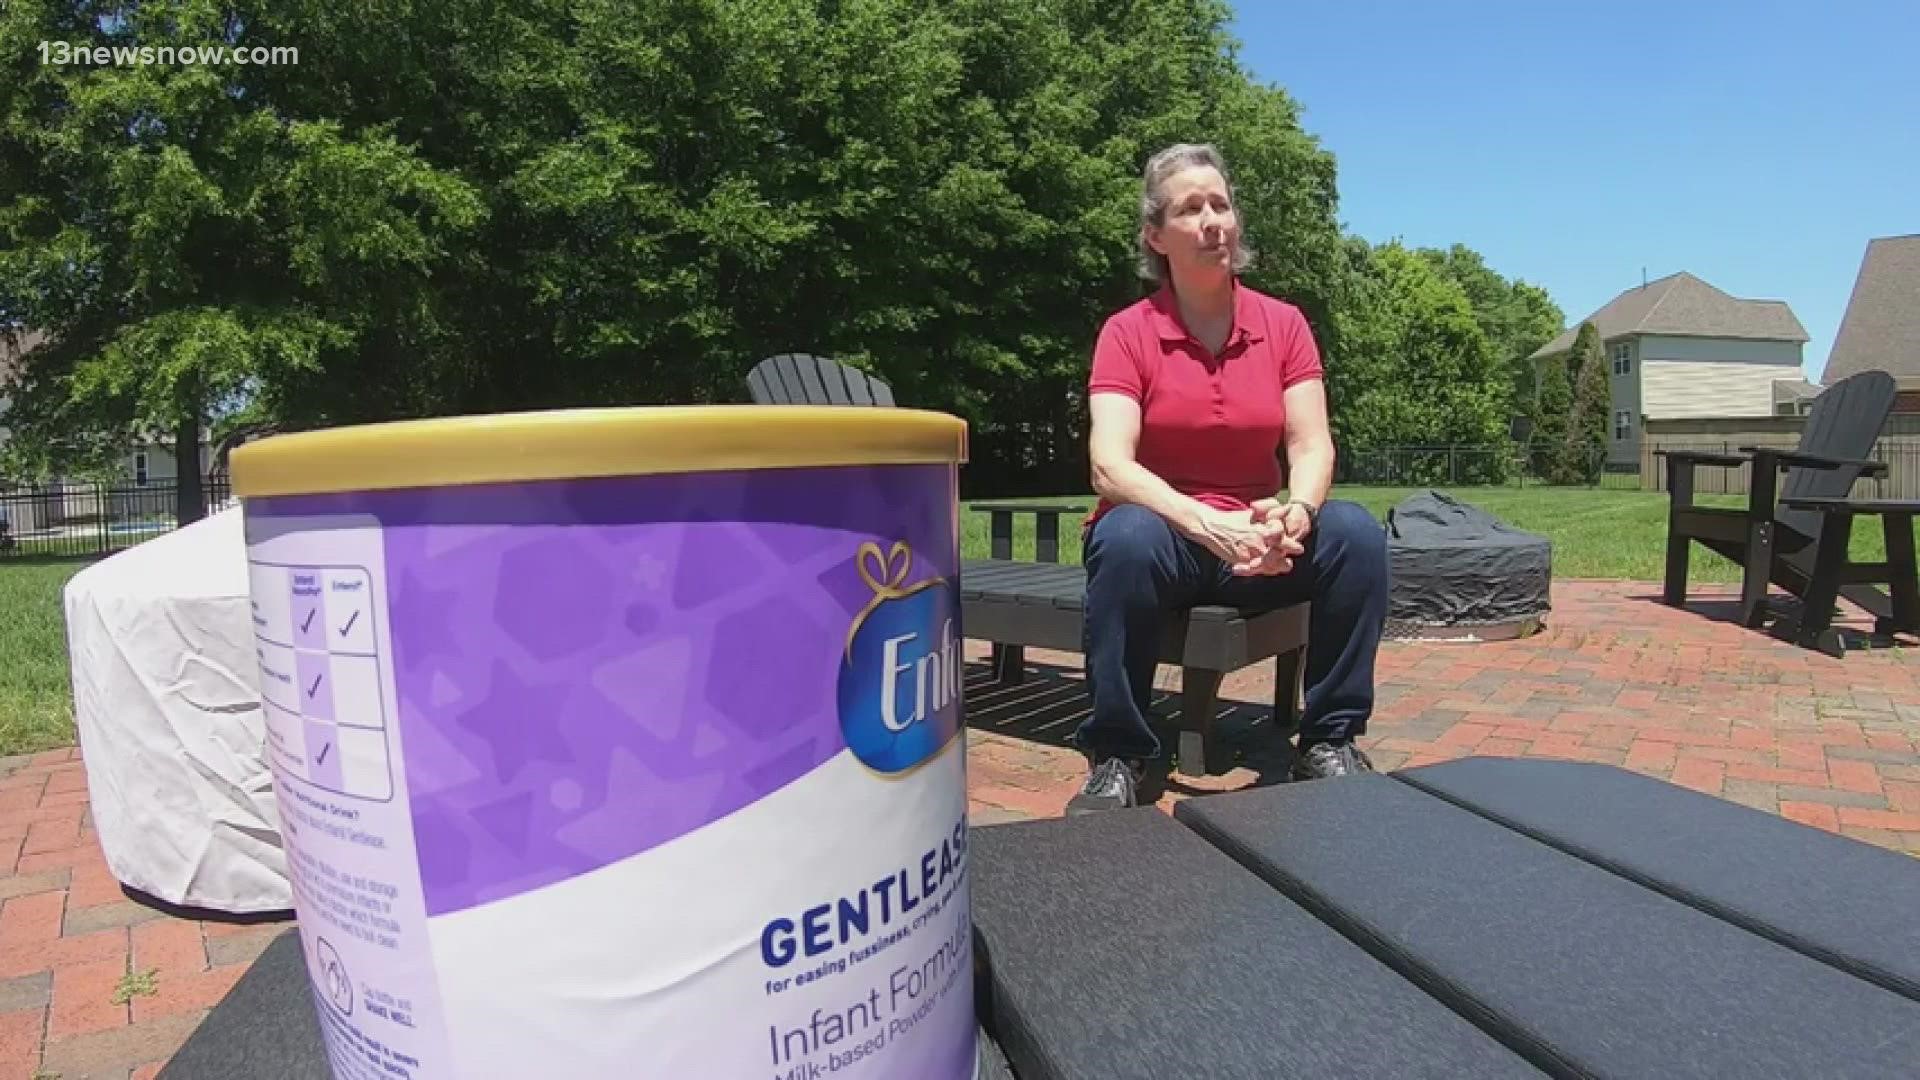 Baby formula is tough to find these days, but a Facebook group in Hampton Roads is helping families tackle the issue.